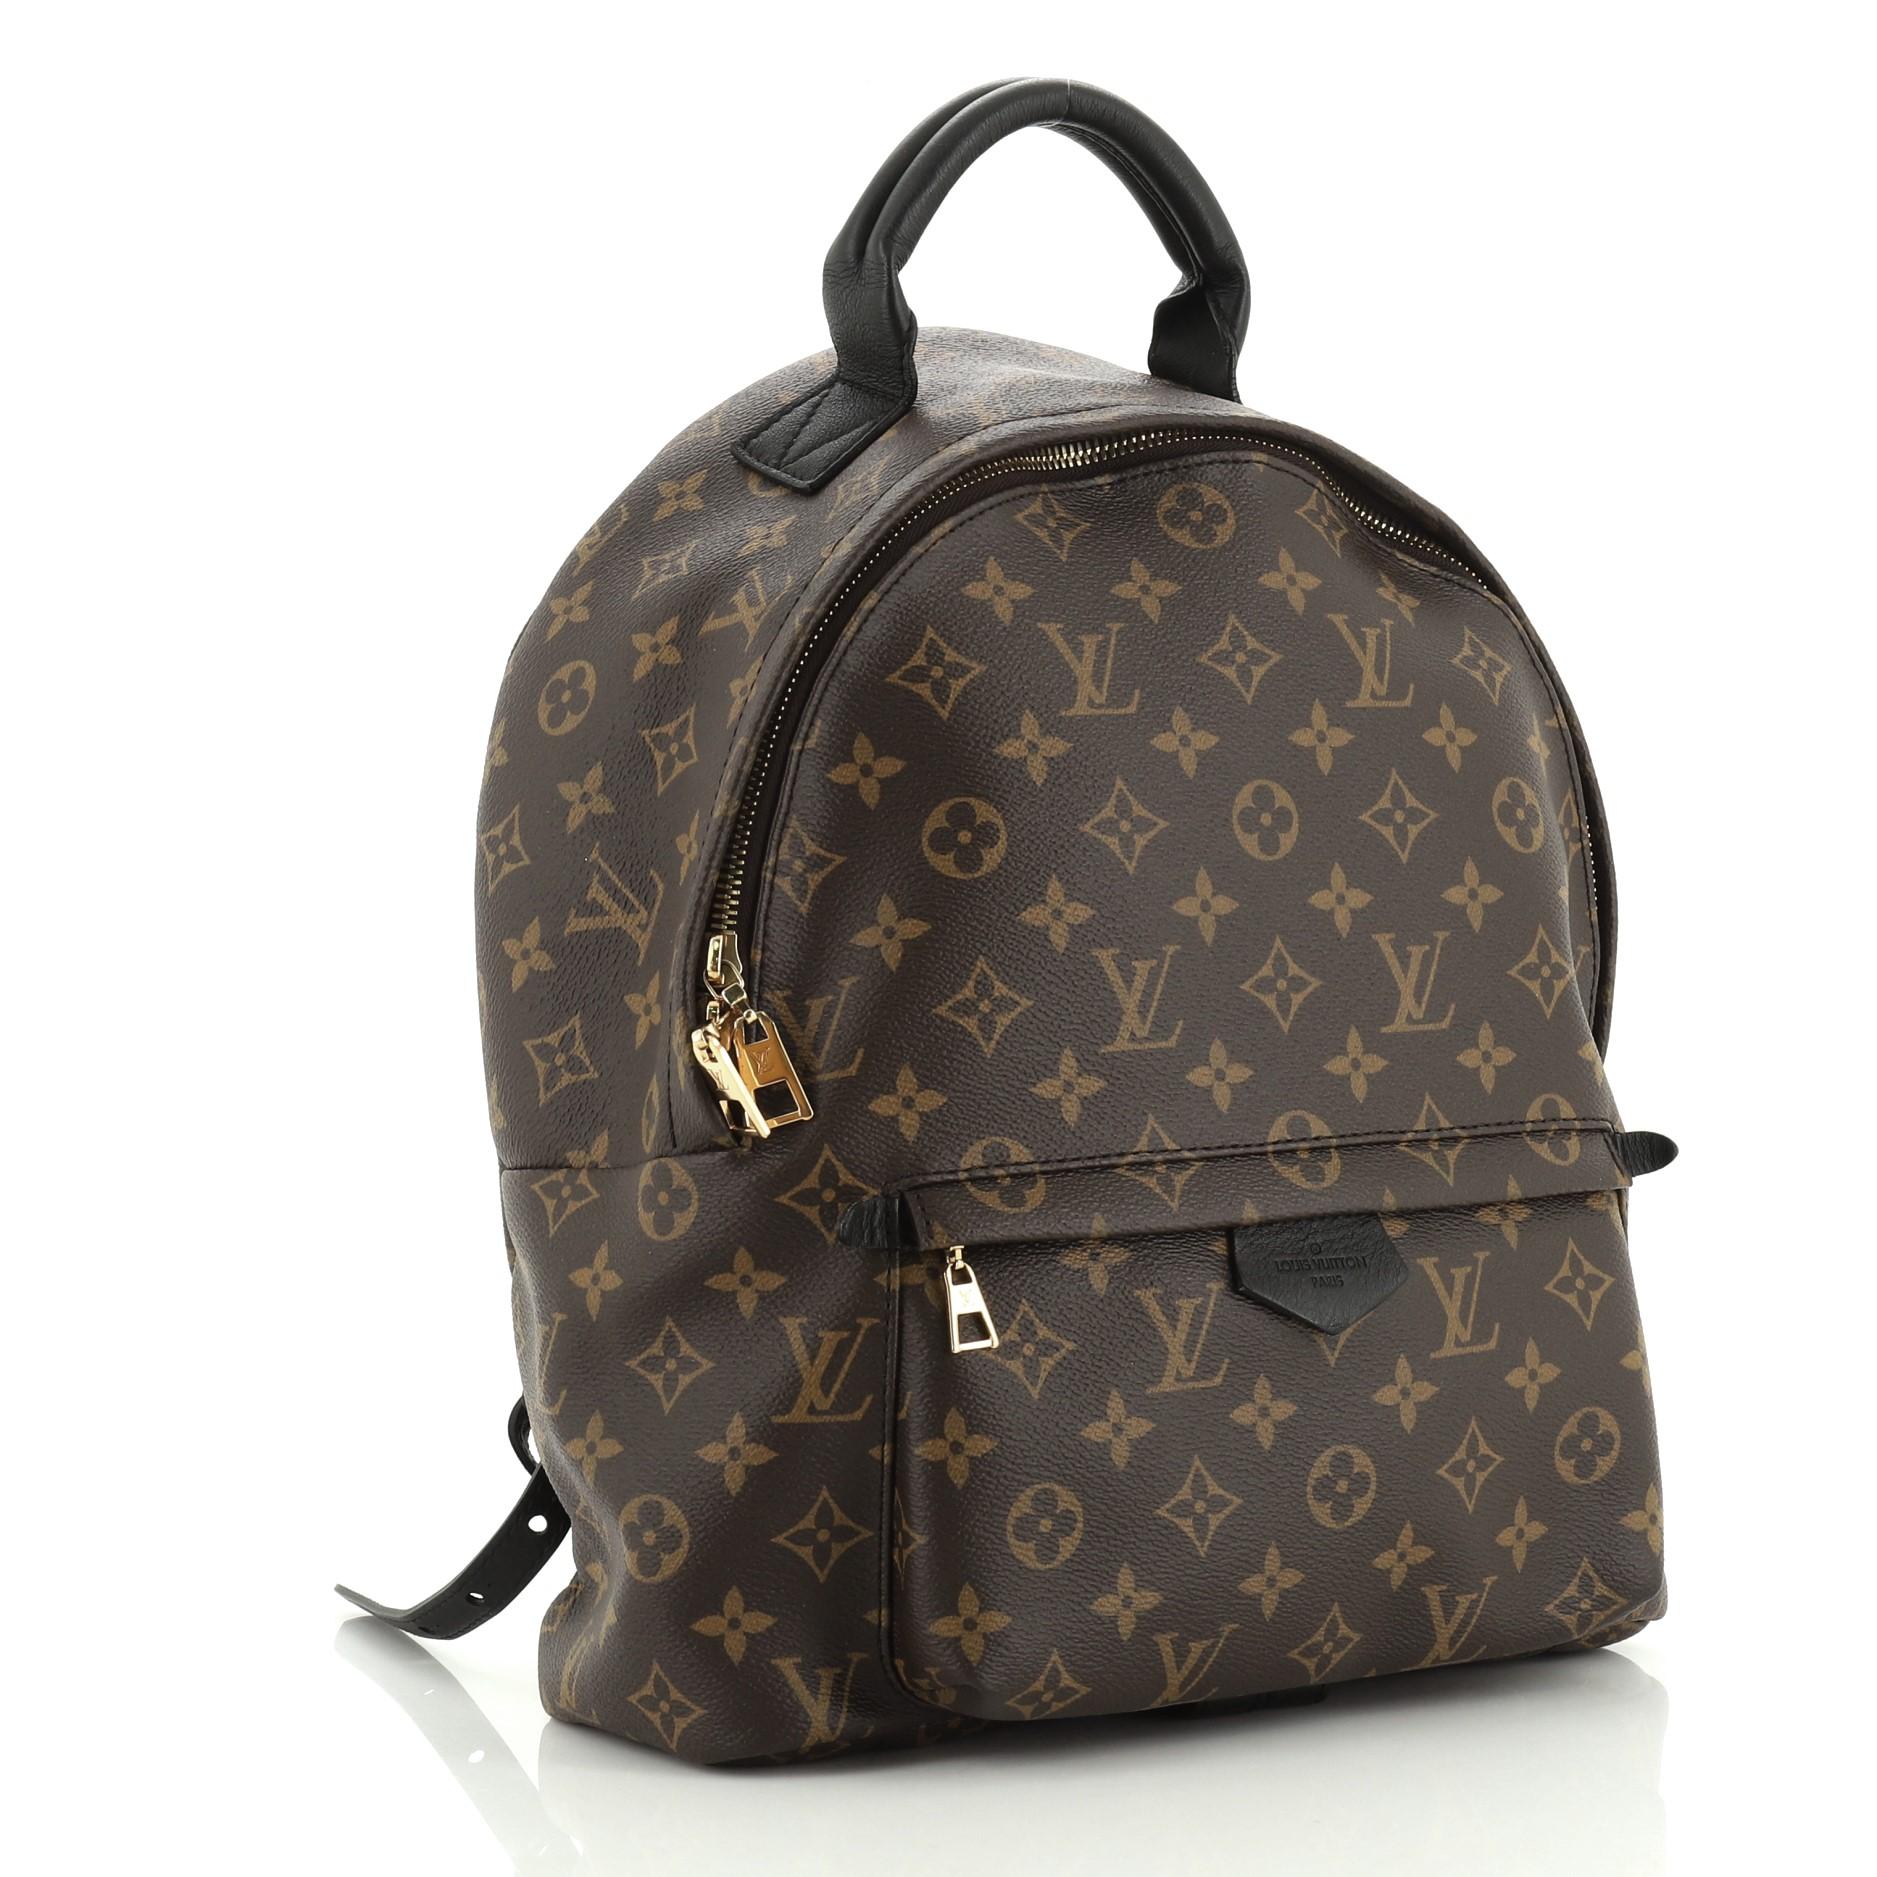 This Louis Vuitton Palm Springs Backpack Monogram Canvas MM, crafted from brown monogram coated canvas, features adjustable shoulder straps, exterior front zip pocket, and gold-tone hardware. Its two-way zip closure opens to a black nylon and fabric